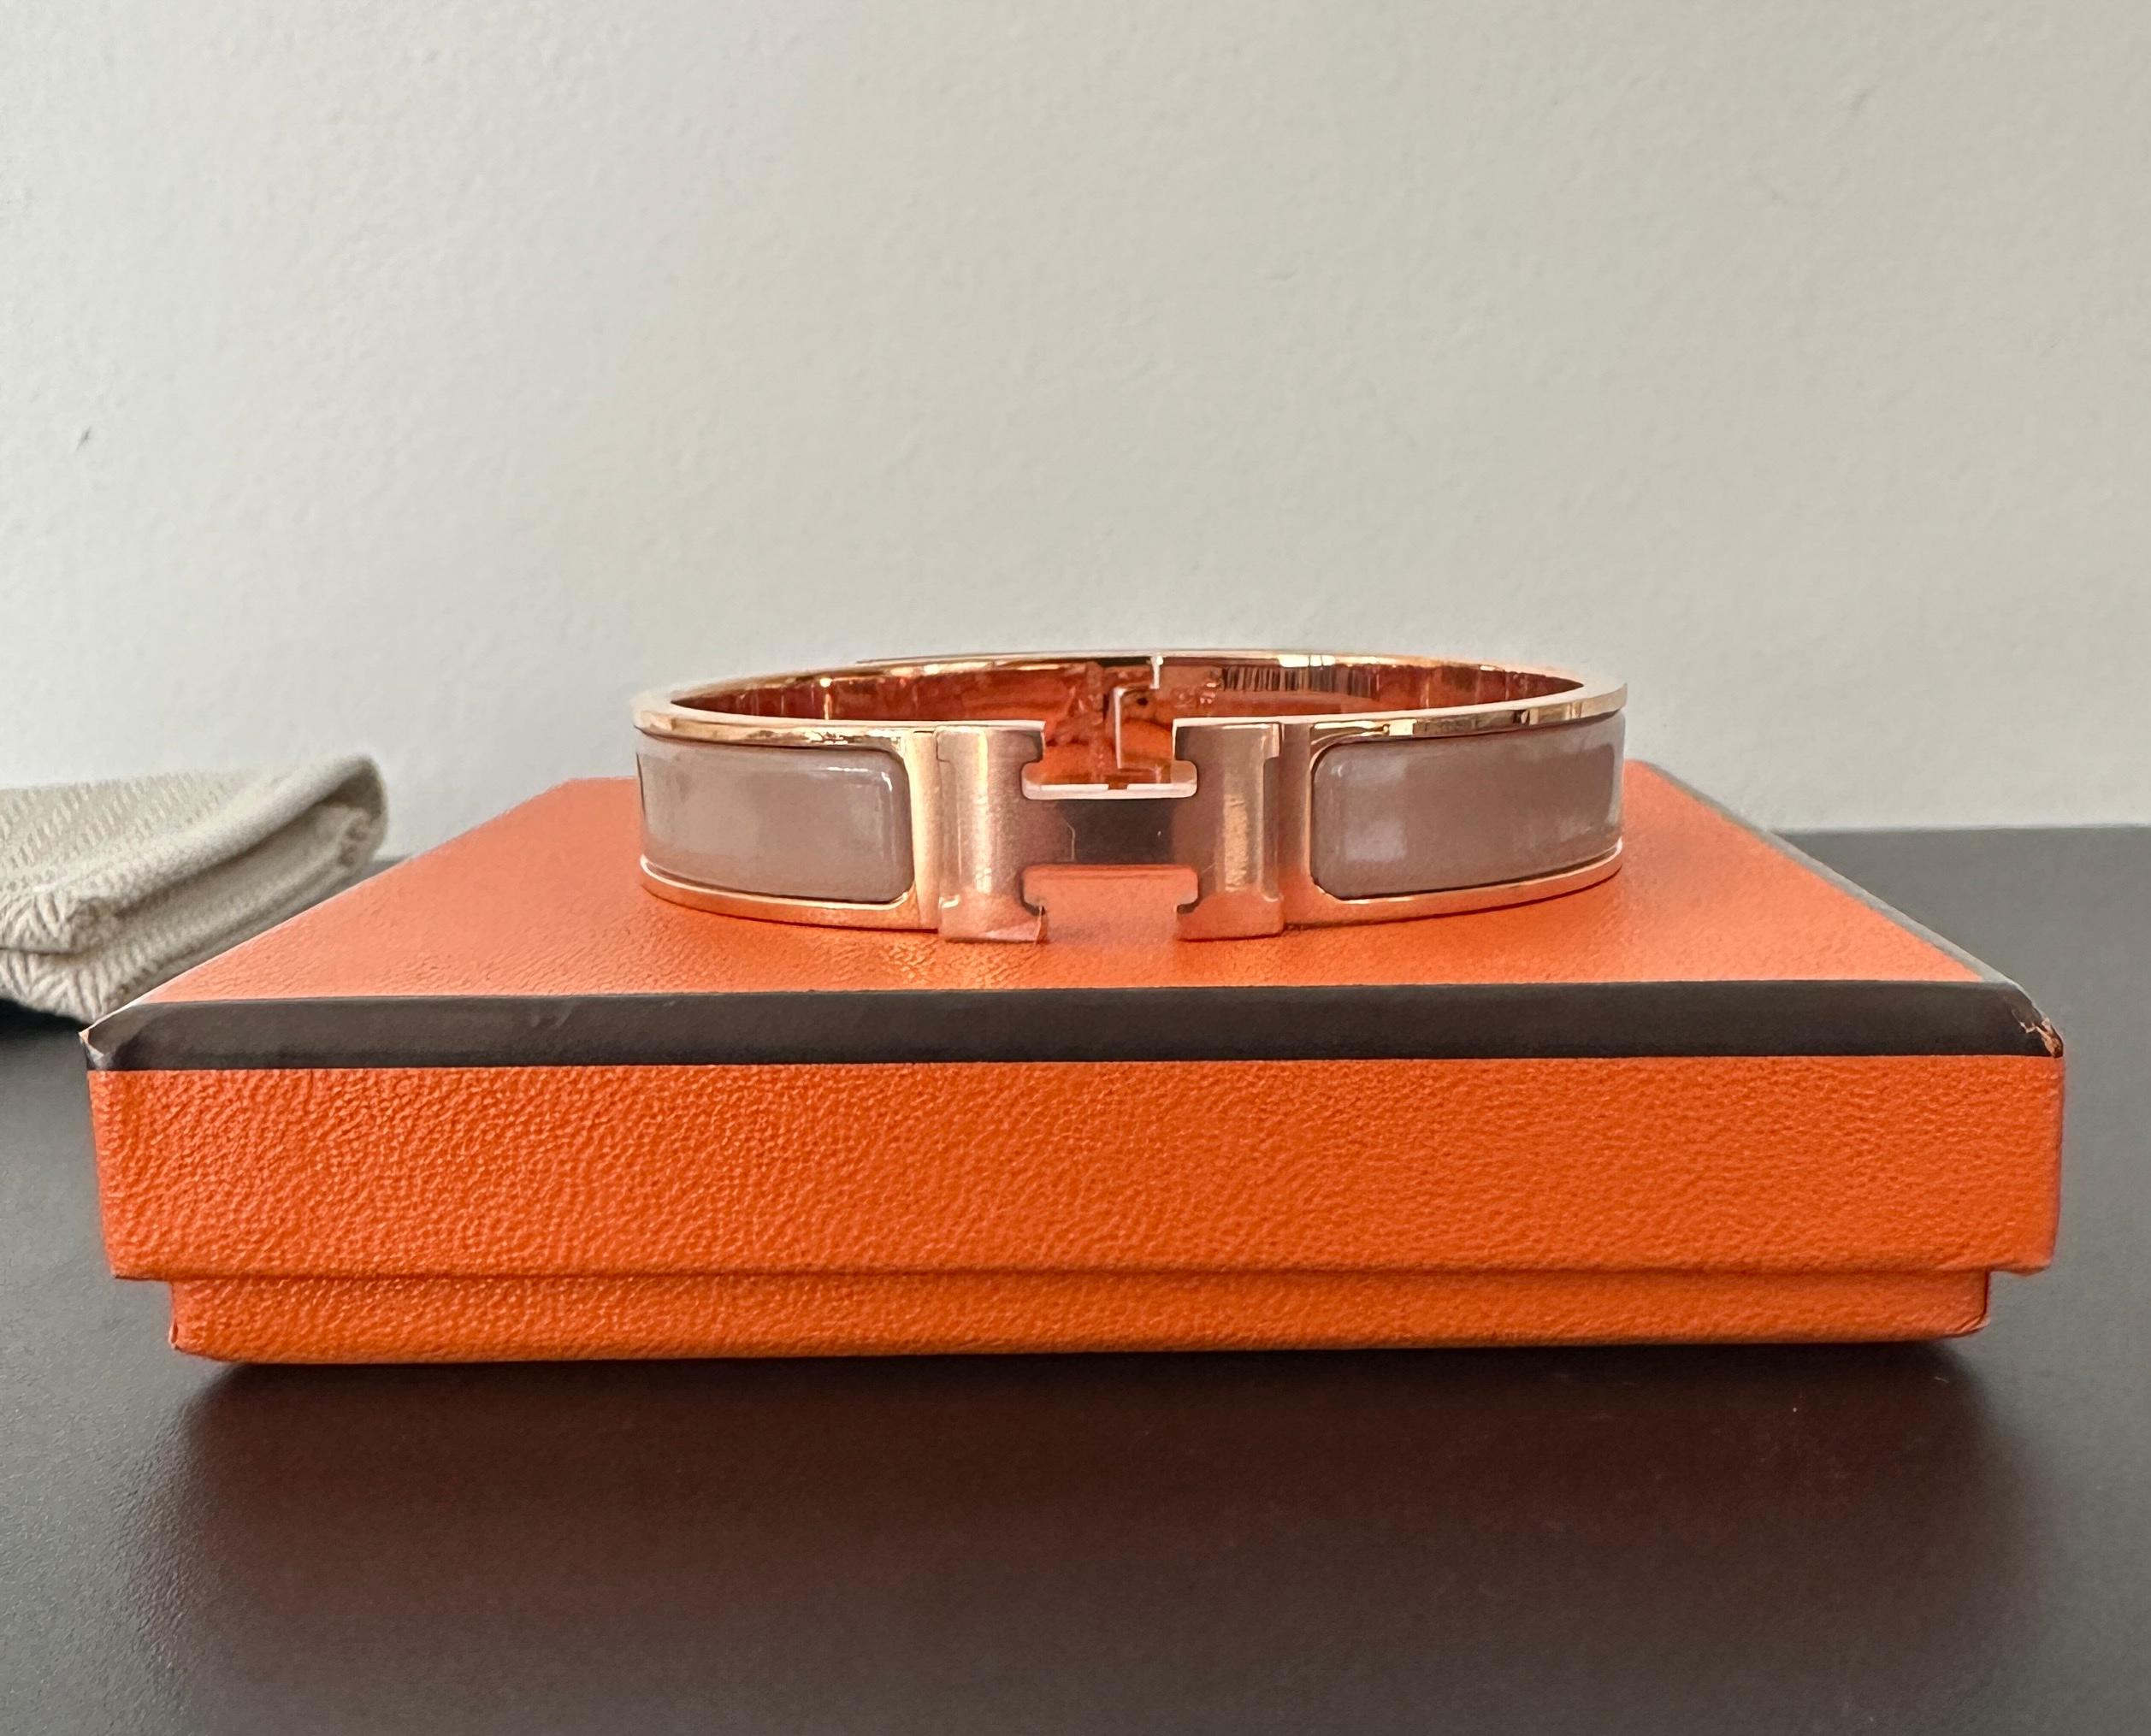 Hermes enamel bracelet with Rose gold plated finish
 
Size is GM (LARGER size, for the larger hand)
Hermes makes this in 2 sizes this is the larger
Narrow bracelet in enamel with rose gold plated hardware
Made in France
Circumference 7.5